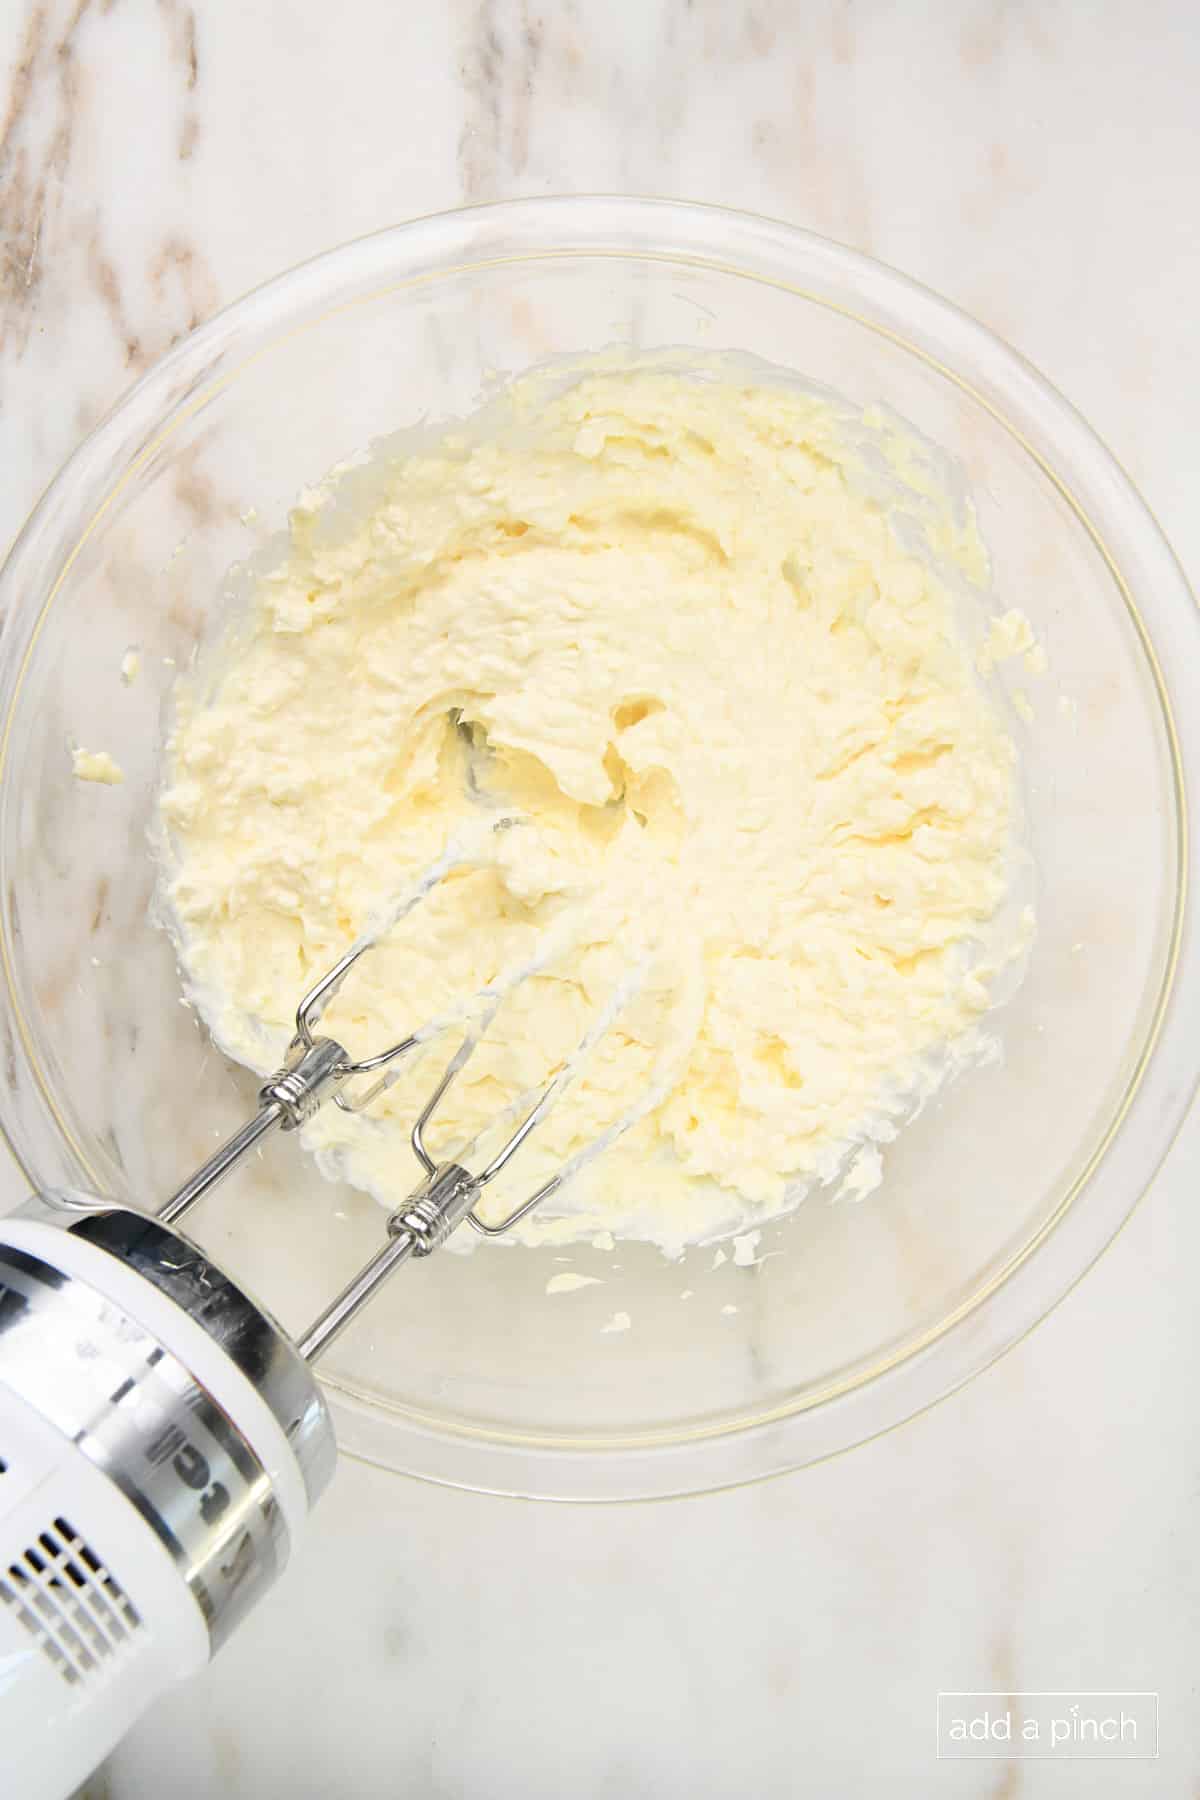 Mixing cream cheese and sour cream in a glass bowl